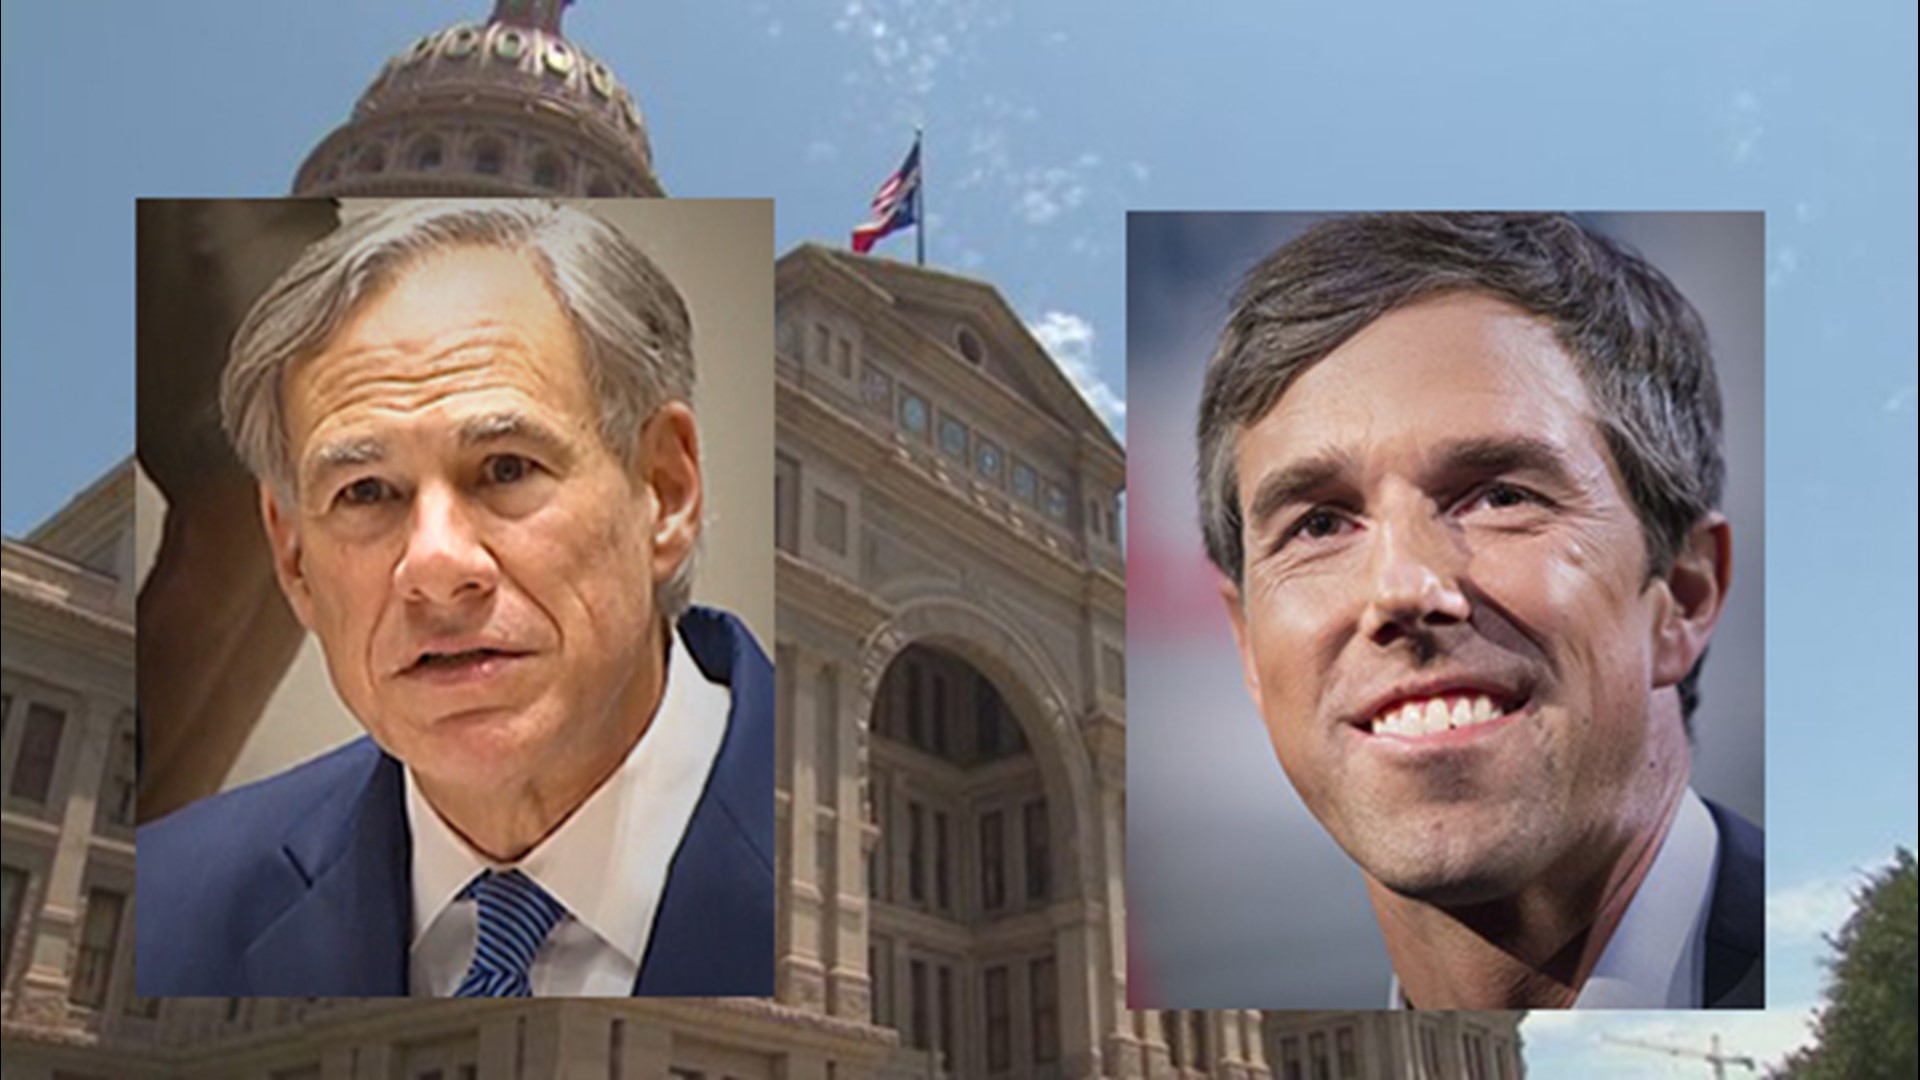 Abbott called O'Rourke "dangerous to the safety of communities" and Beto accused the incumbent of "lying" and said he's failed as governor.